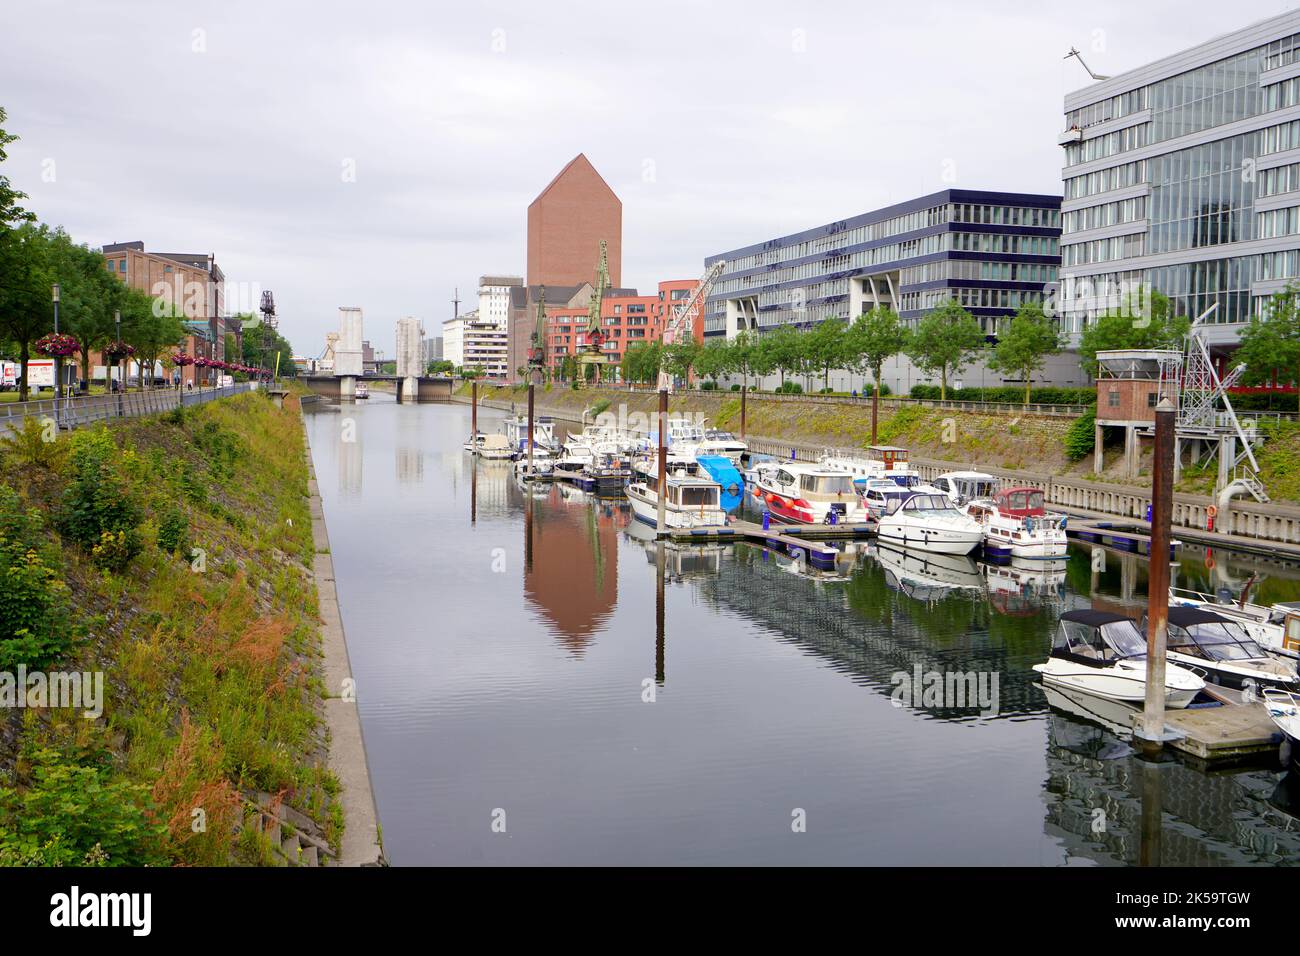 DUISBURG, GERMANY - JUNE 10, 2022: Inner harbor of Duisburg with the buildings of Mitsubishi, Hitachi, TK Gesundheit and the State Archives of North R Stock Photo